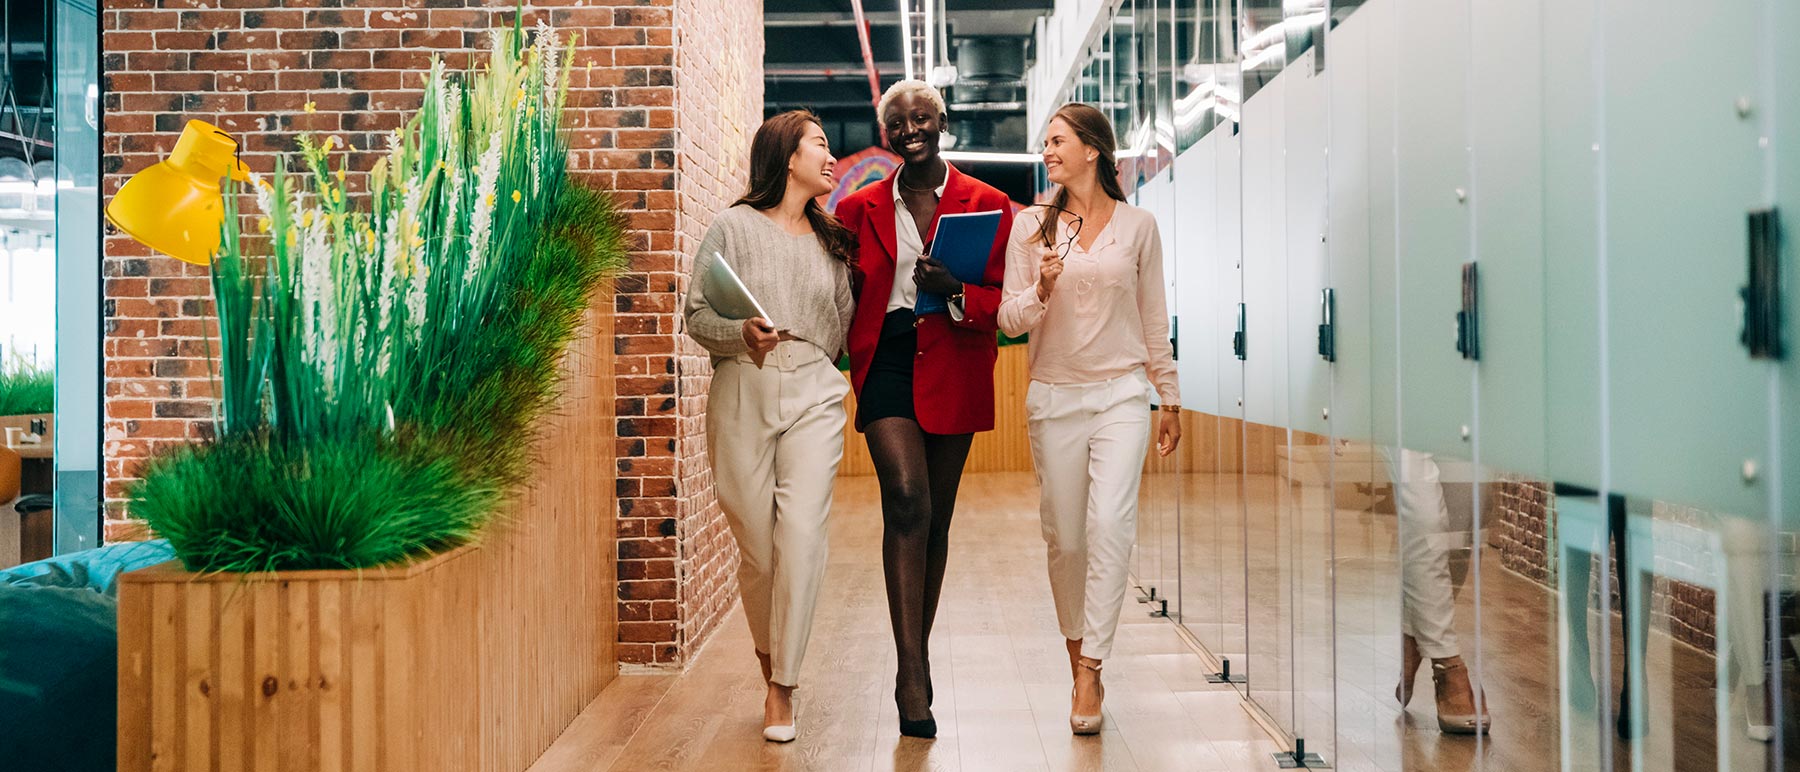 Three smiling women walk down an office hallway smiling at each other